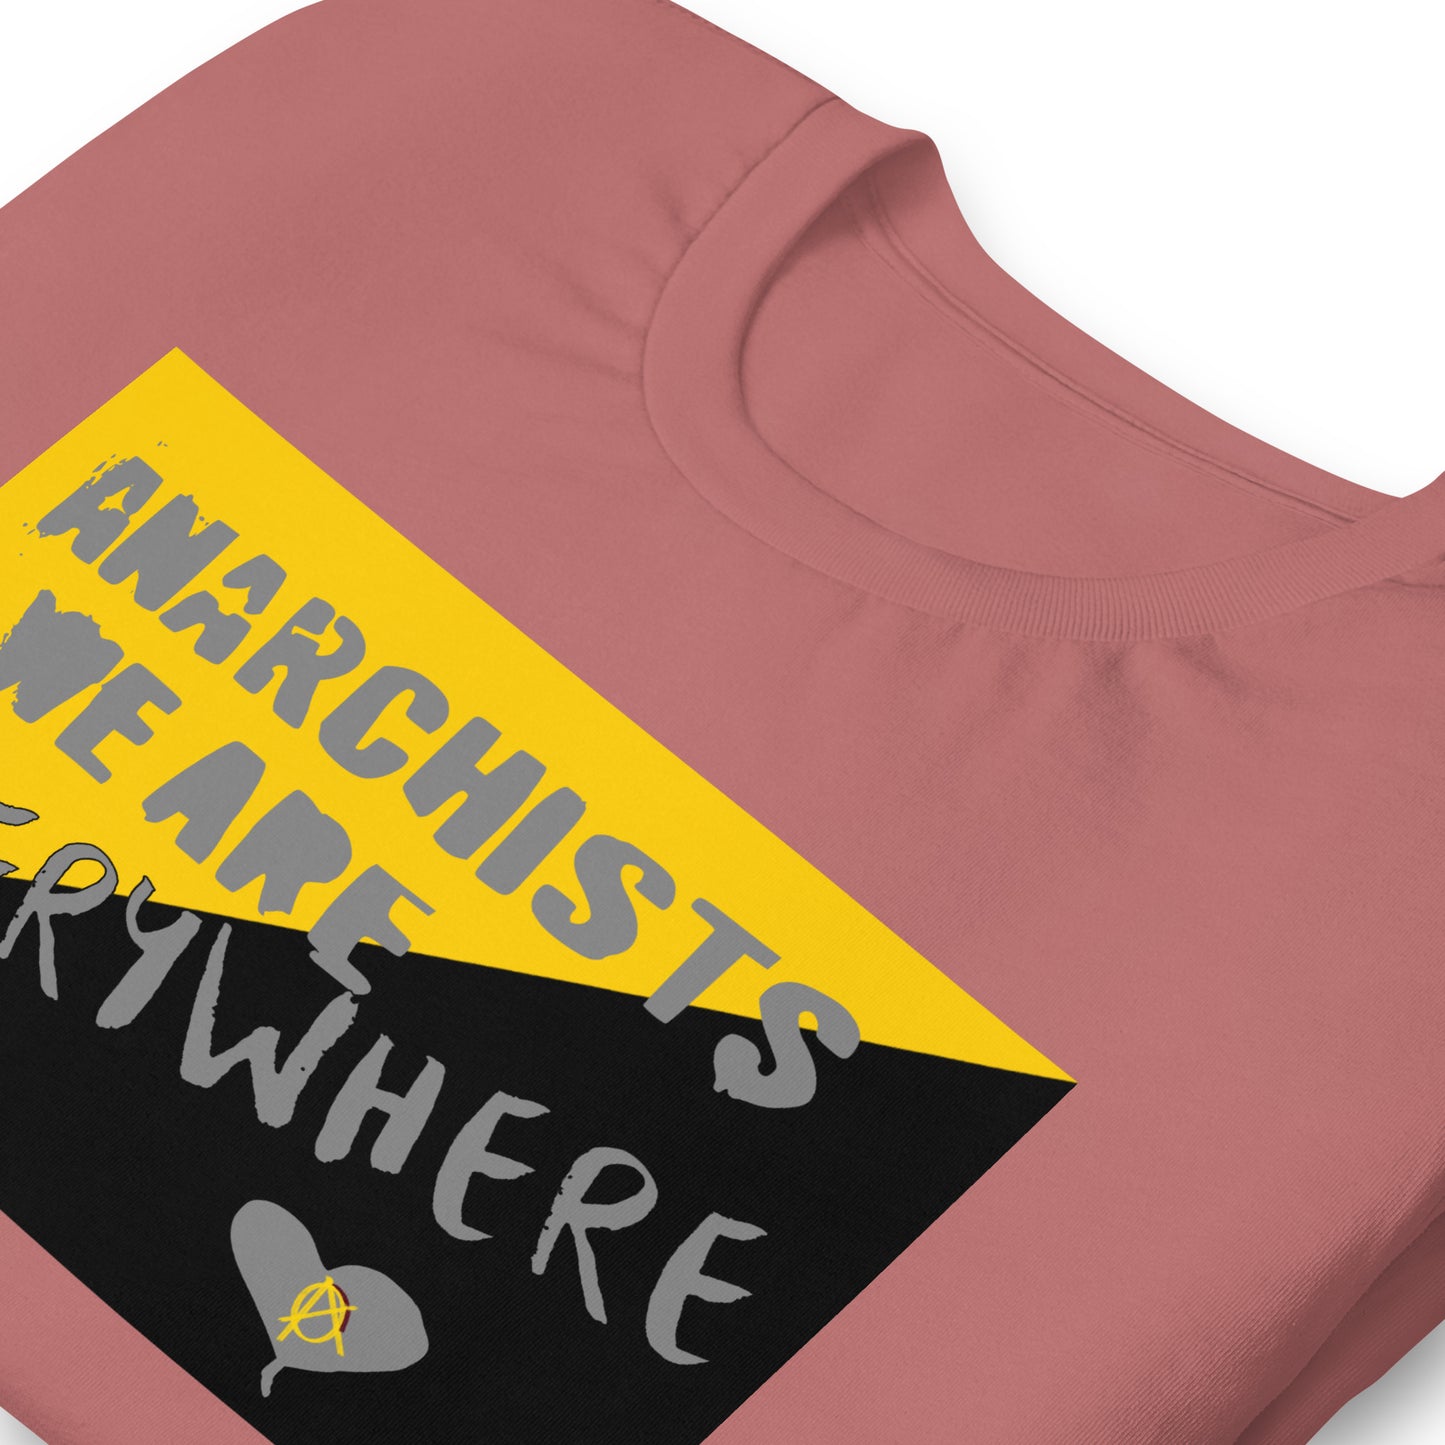 Anarchy Wear "We Are Every Where" Pastels Unisex t-shirt